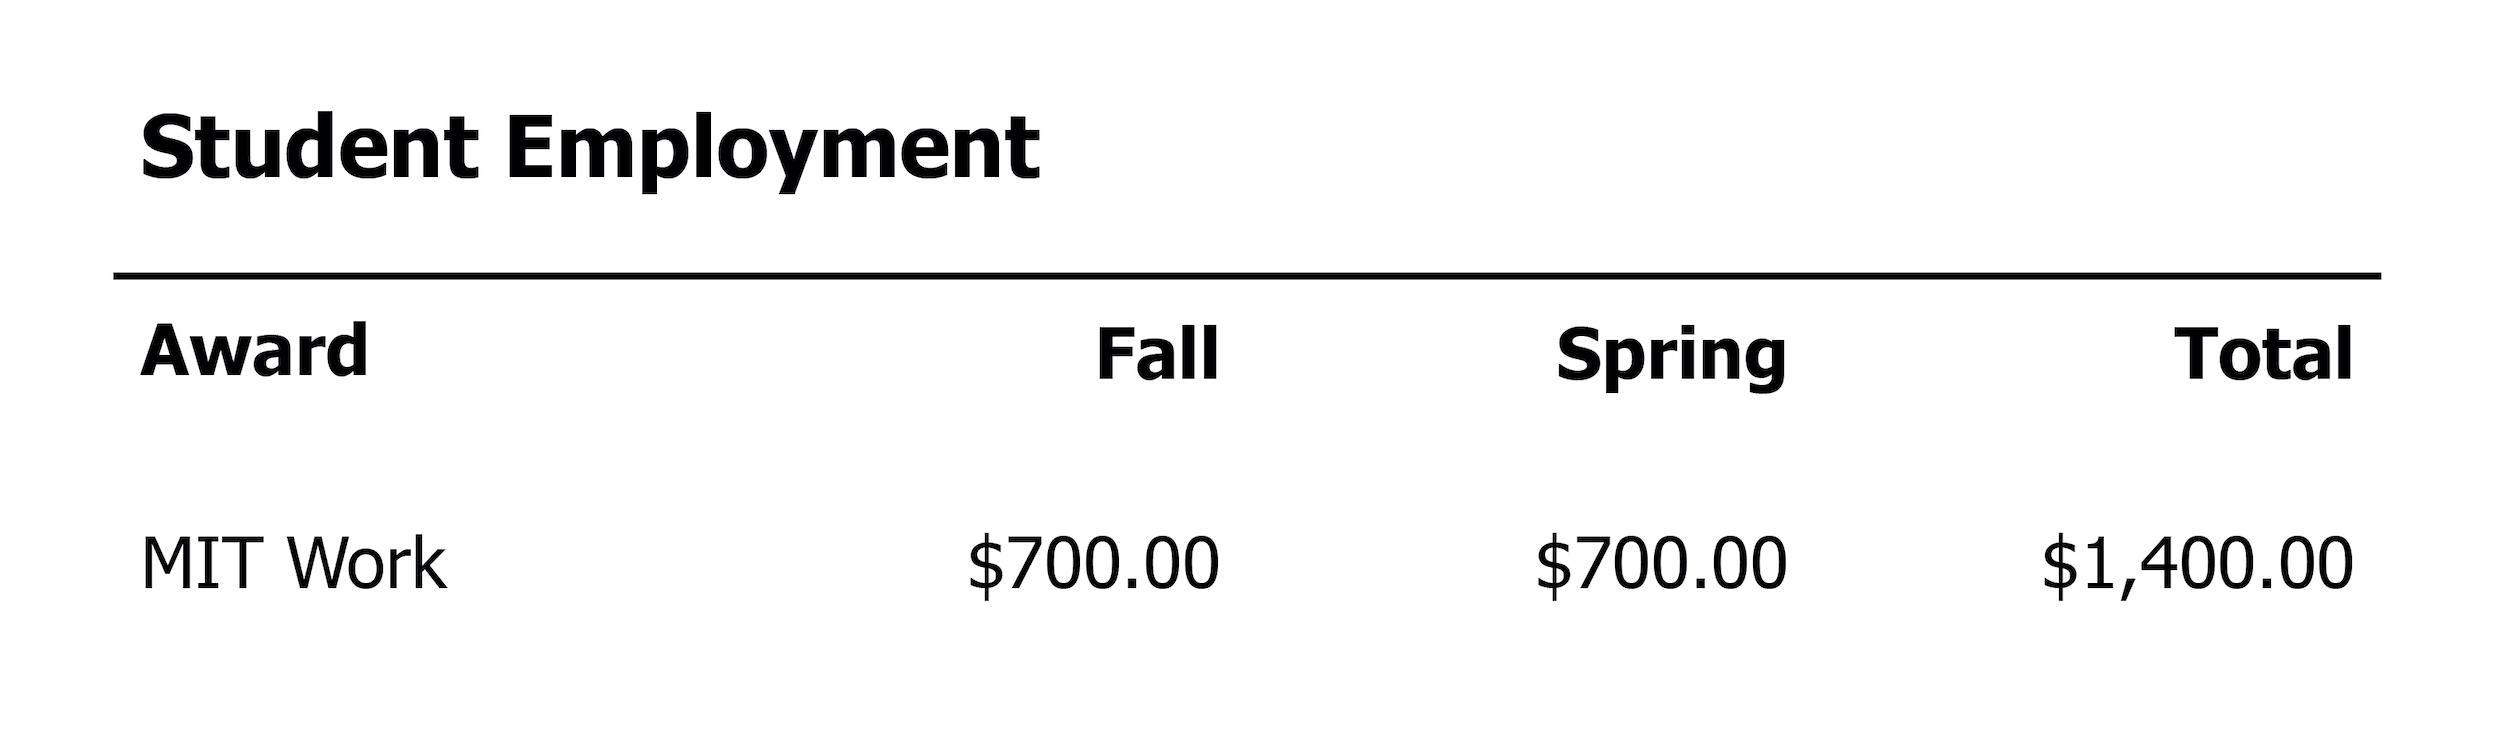 Student employment chart from a sample financial aid award letter.